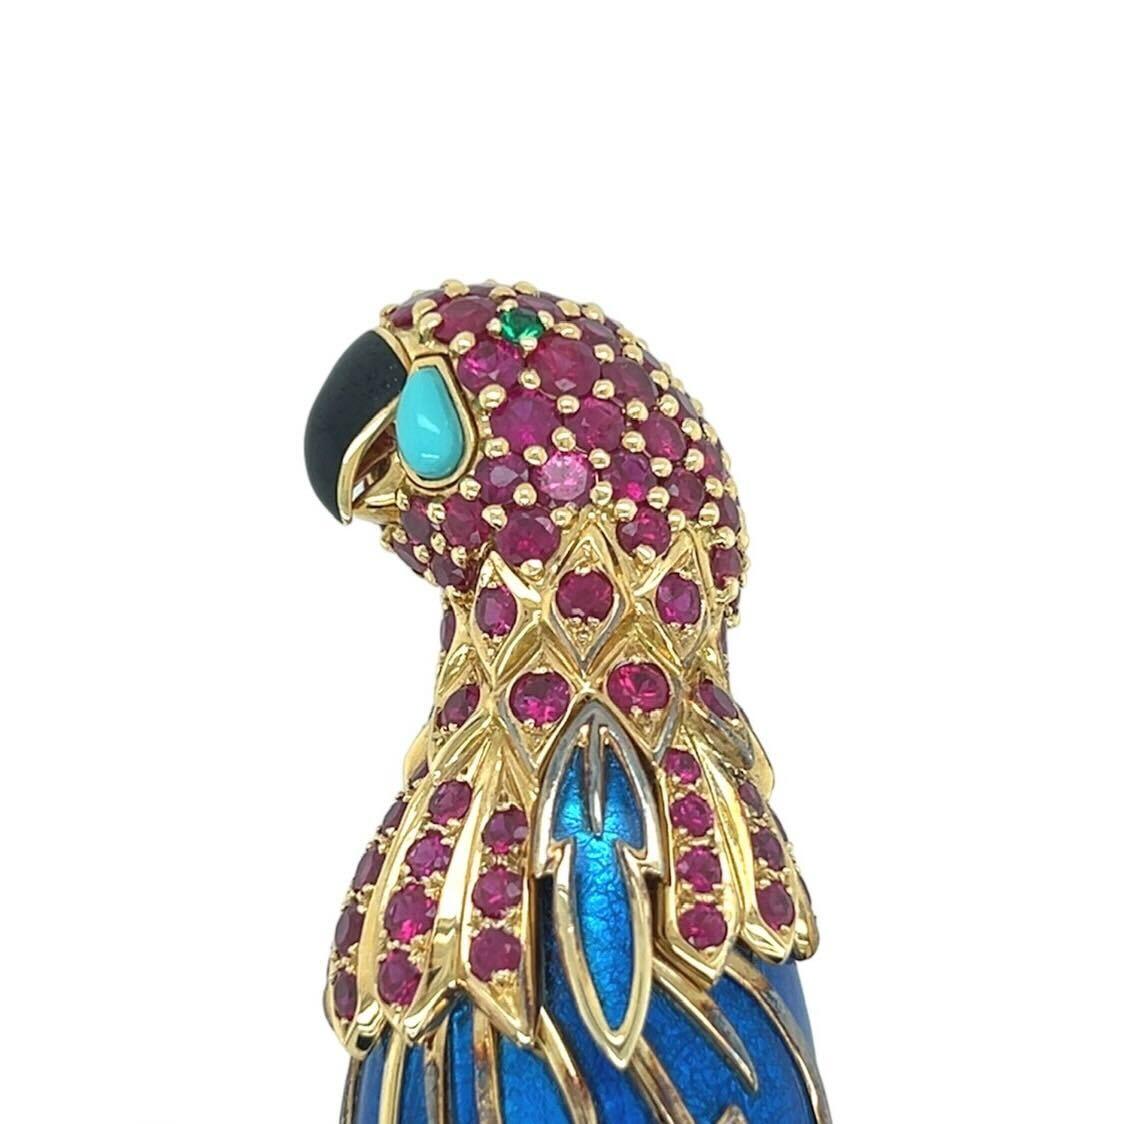 Women's or Men's JEAN SCHLUMBERGER, TIFFANY & CO., Yellow Gold, Ruby, Turquoise and Enamel Brooch